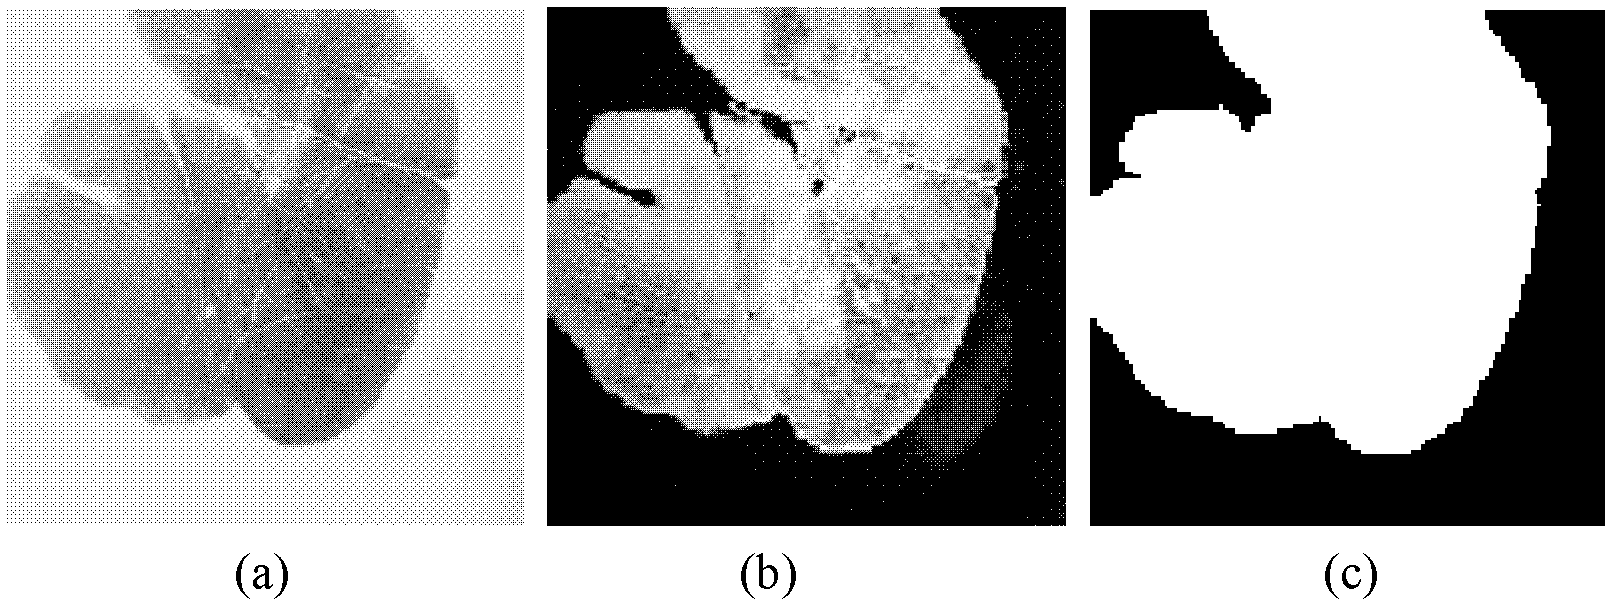 Method for identifying left and right palm prints based on directions